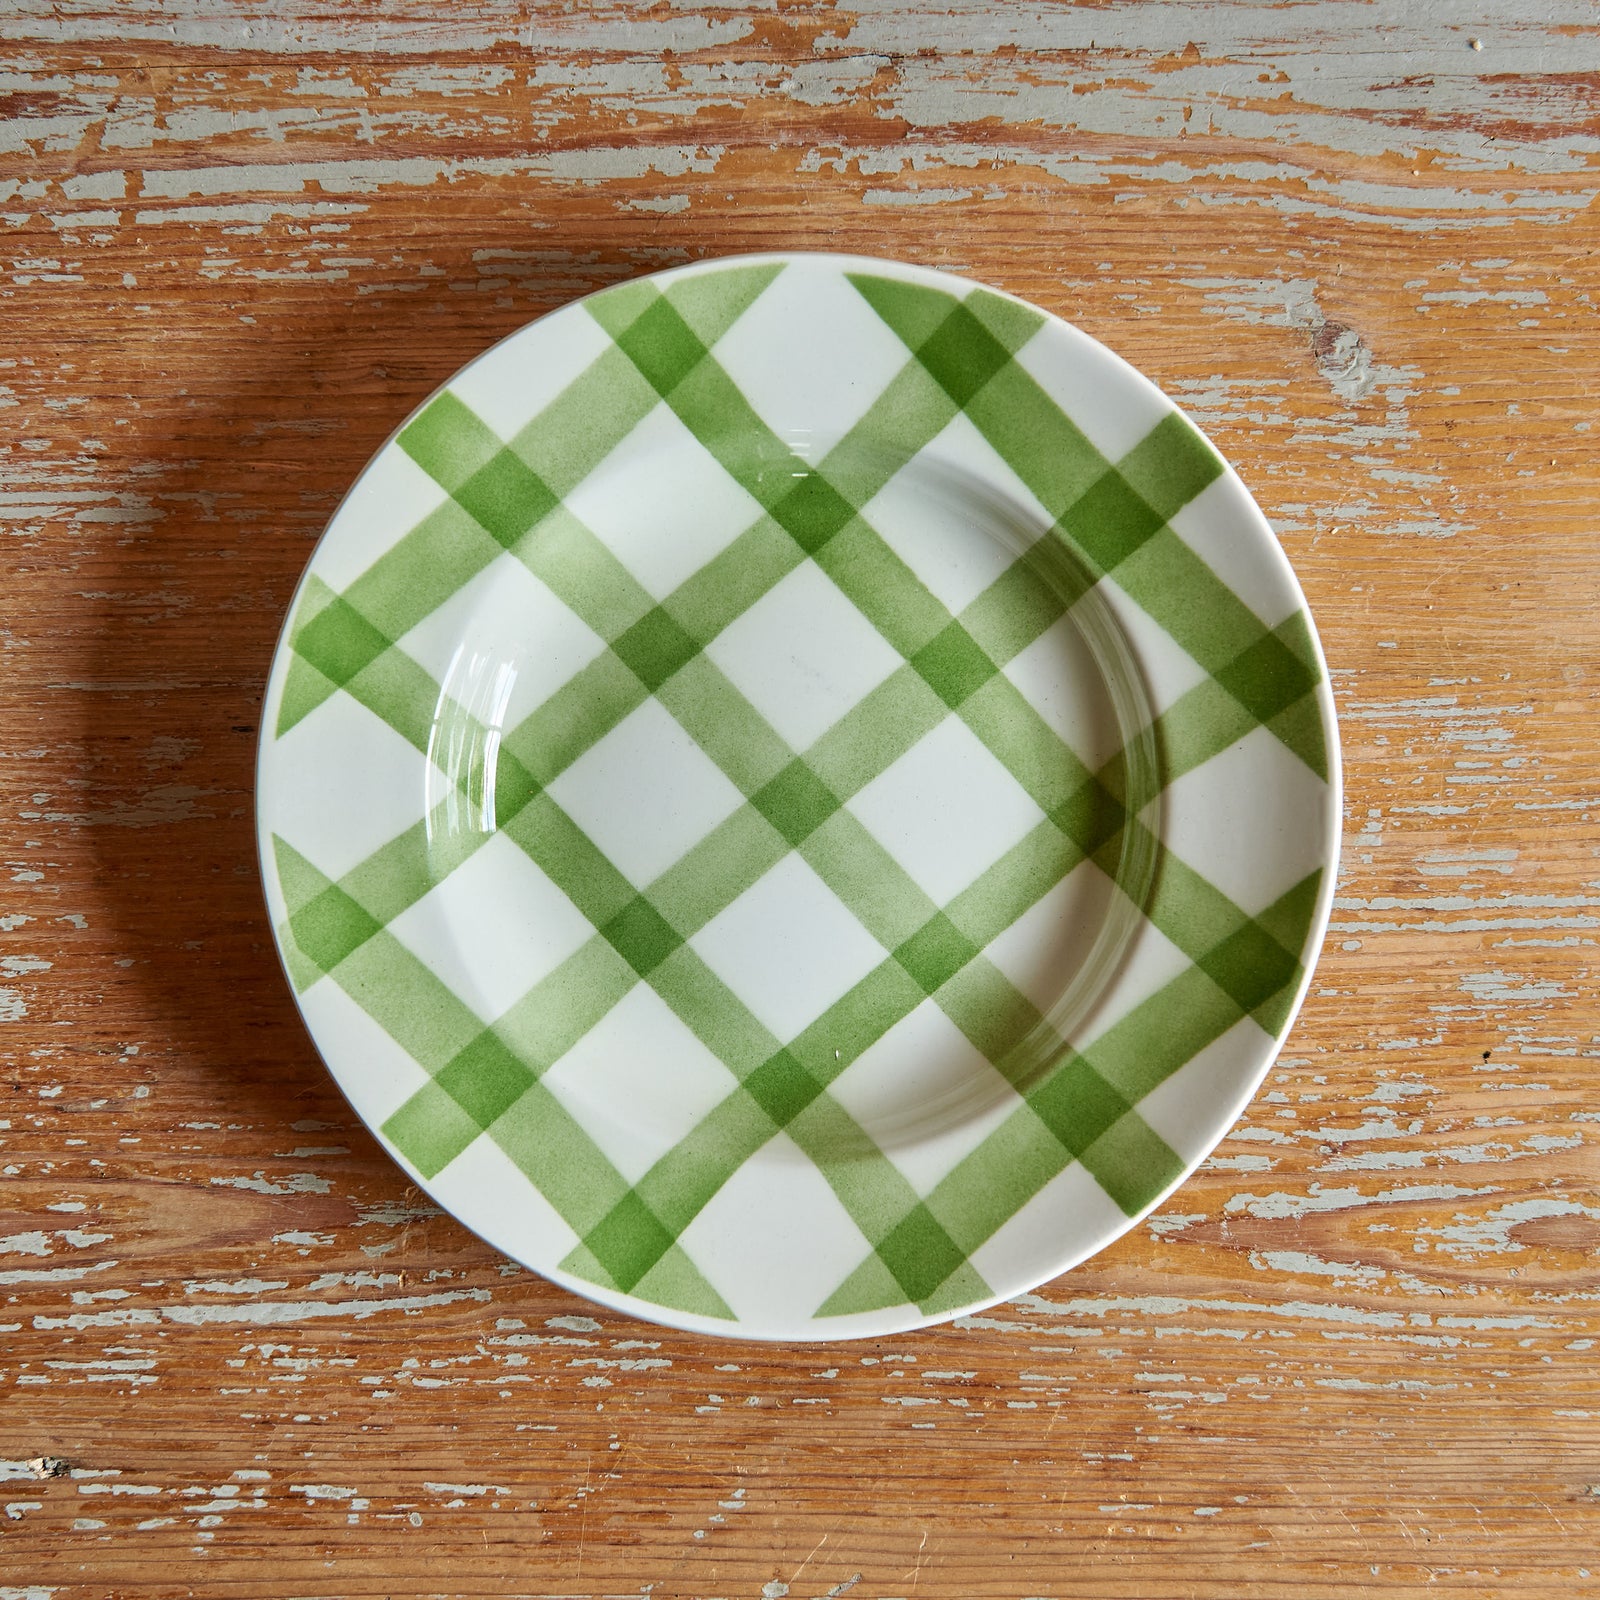 Green Gingham Soup Plate